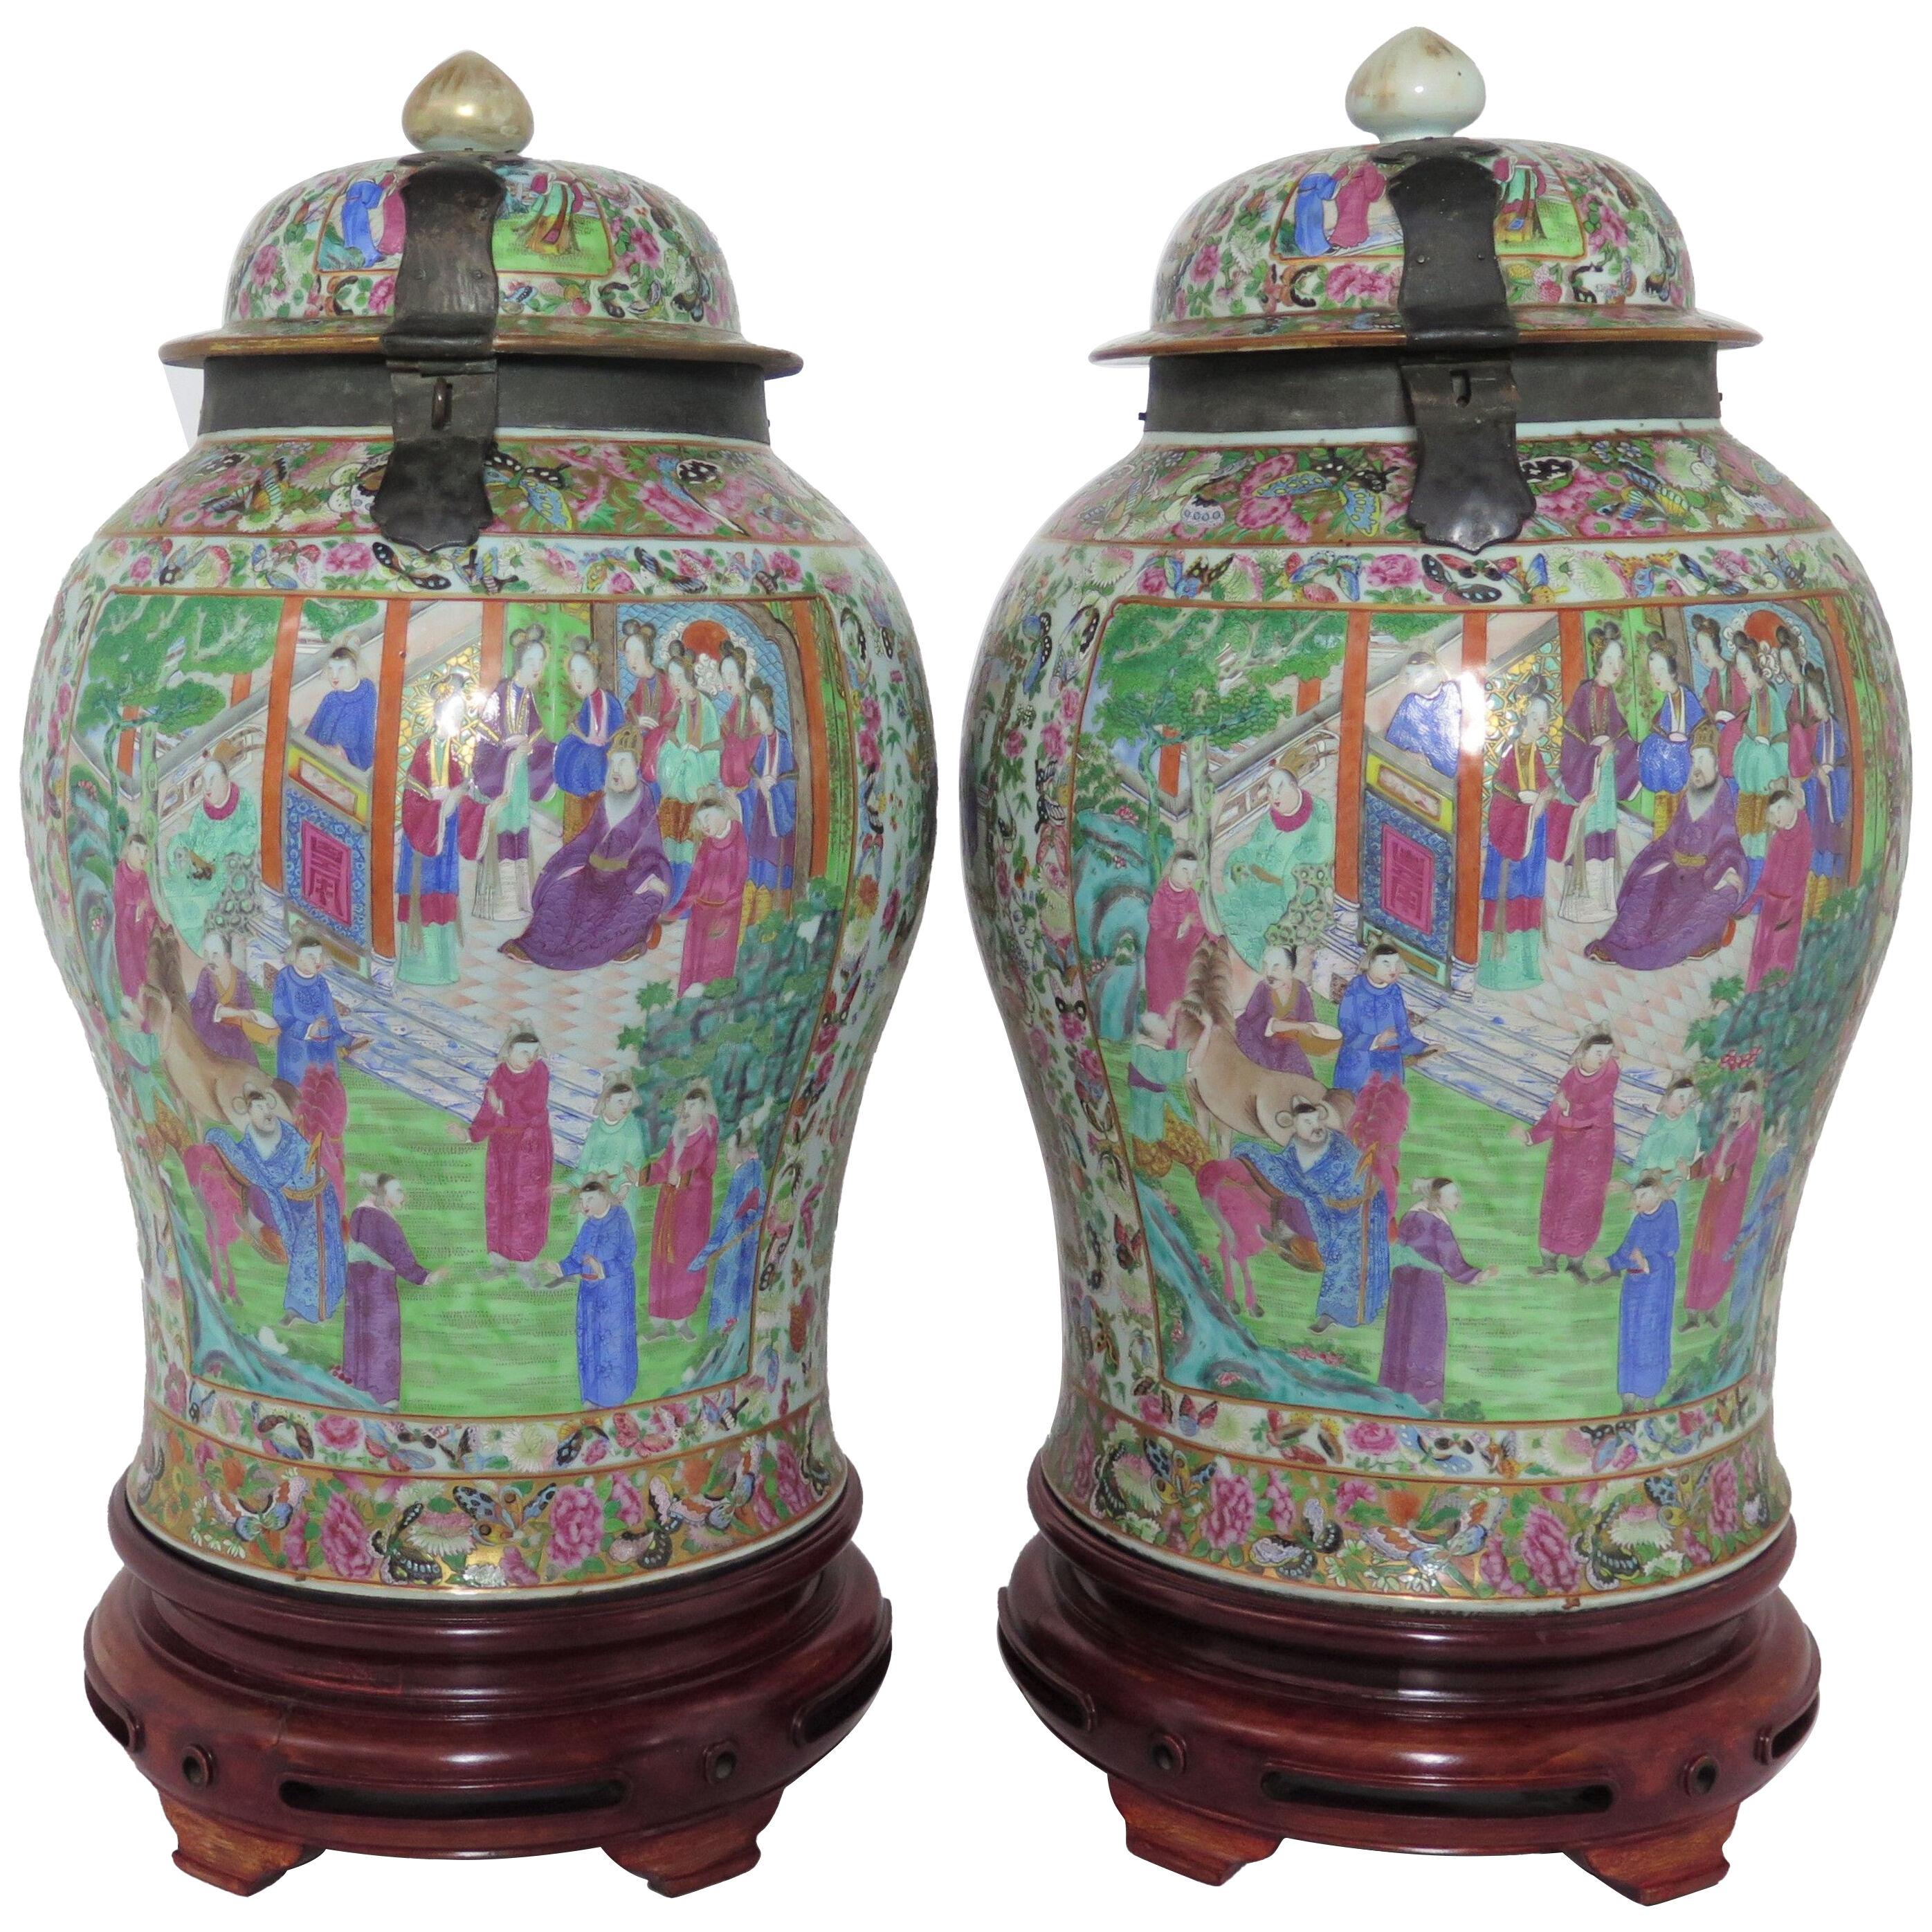 A Pair of Late 18th-Early 19th Century Chinese Lidded Jars